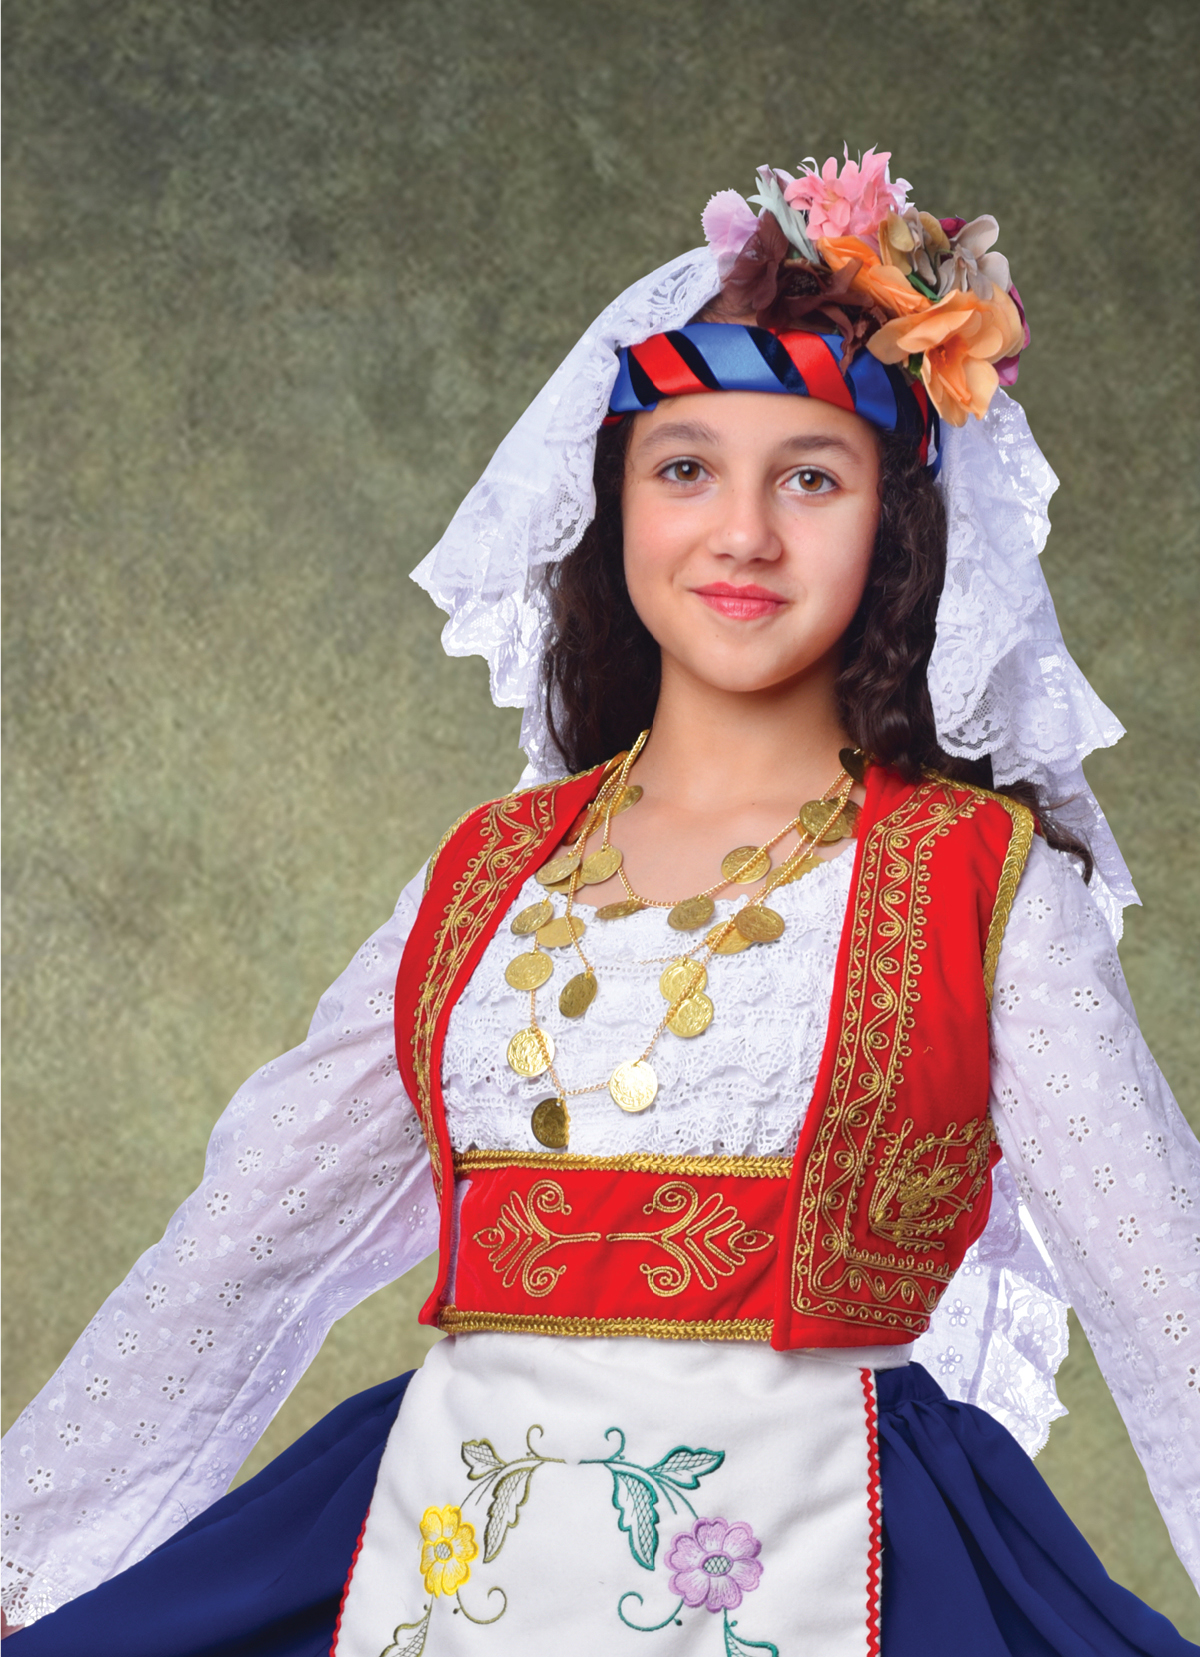 First Greek Costume Exhibition Outside the Country - GreekReporter.com